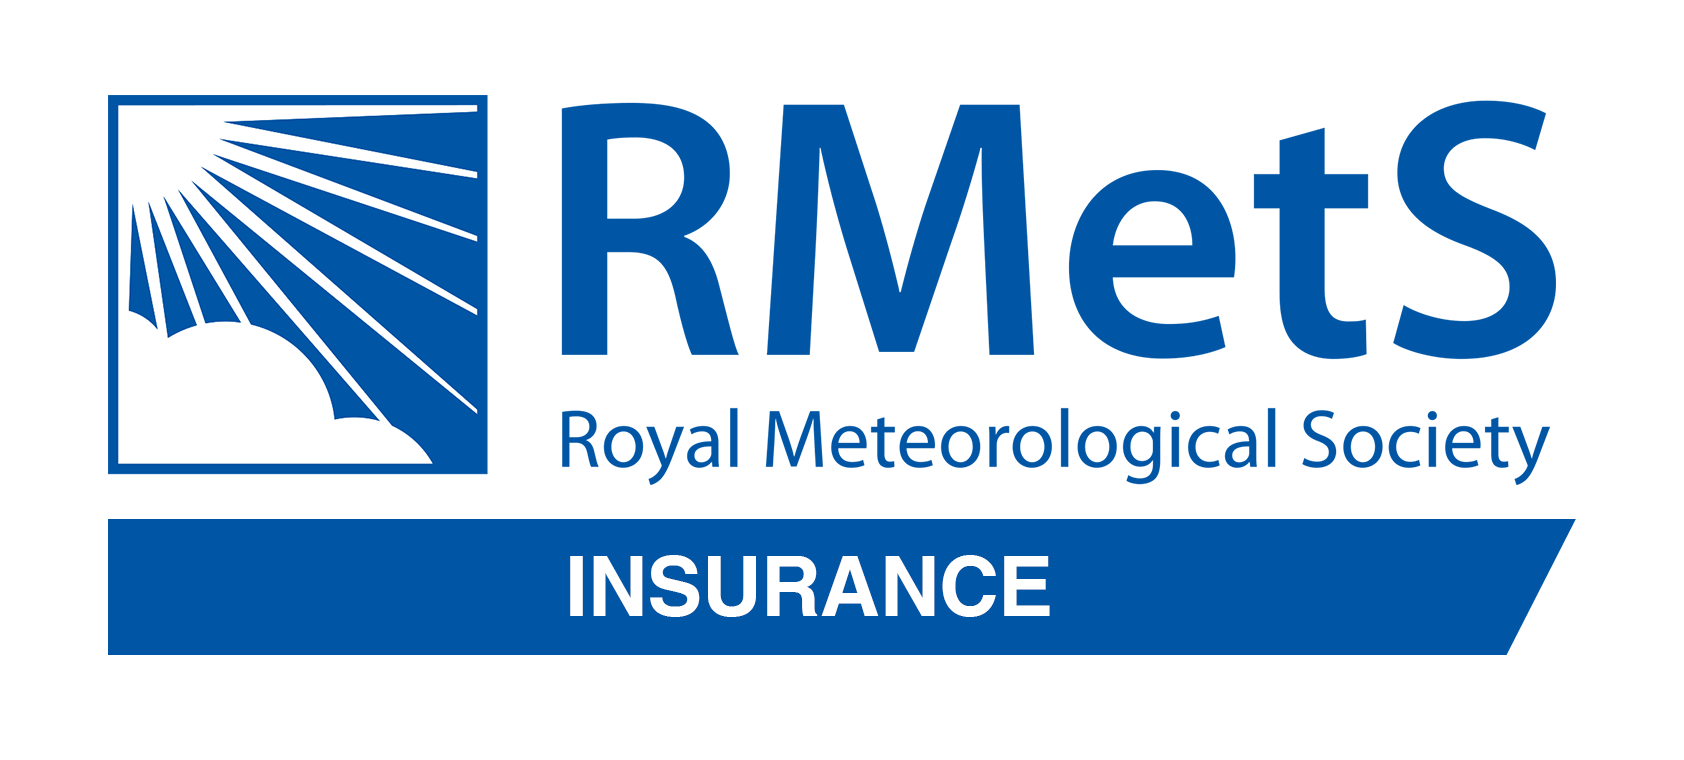 Royal Meteorological Society's Insurance Special Interest Group Logo